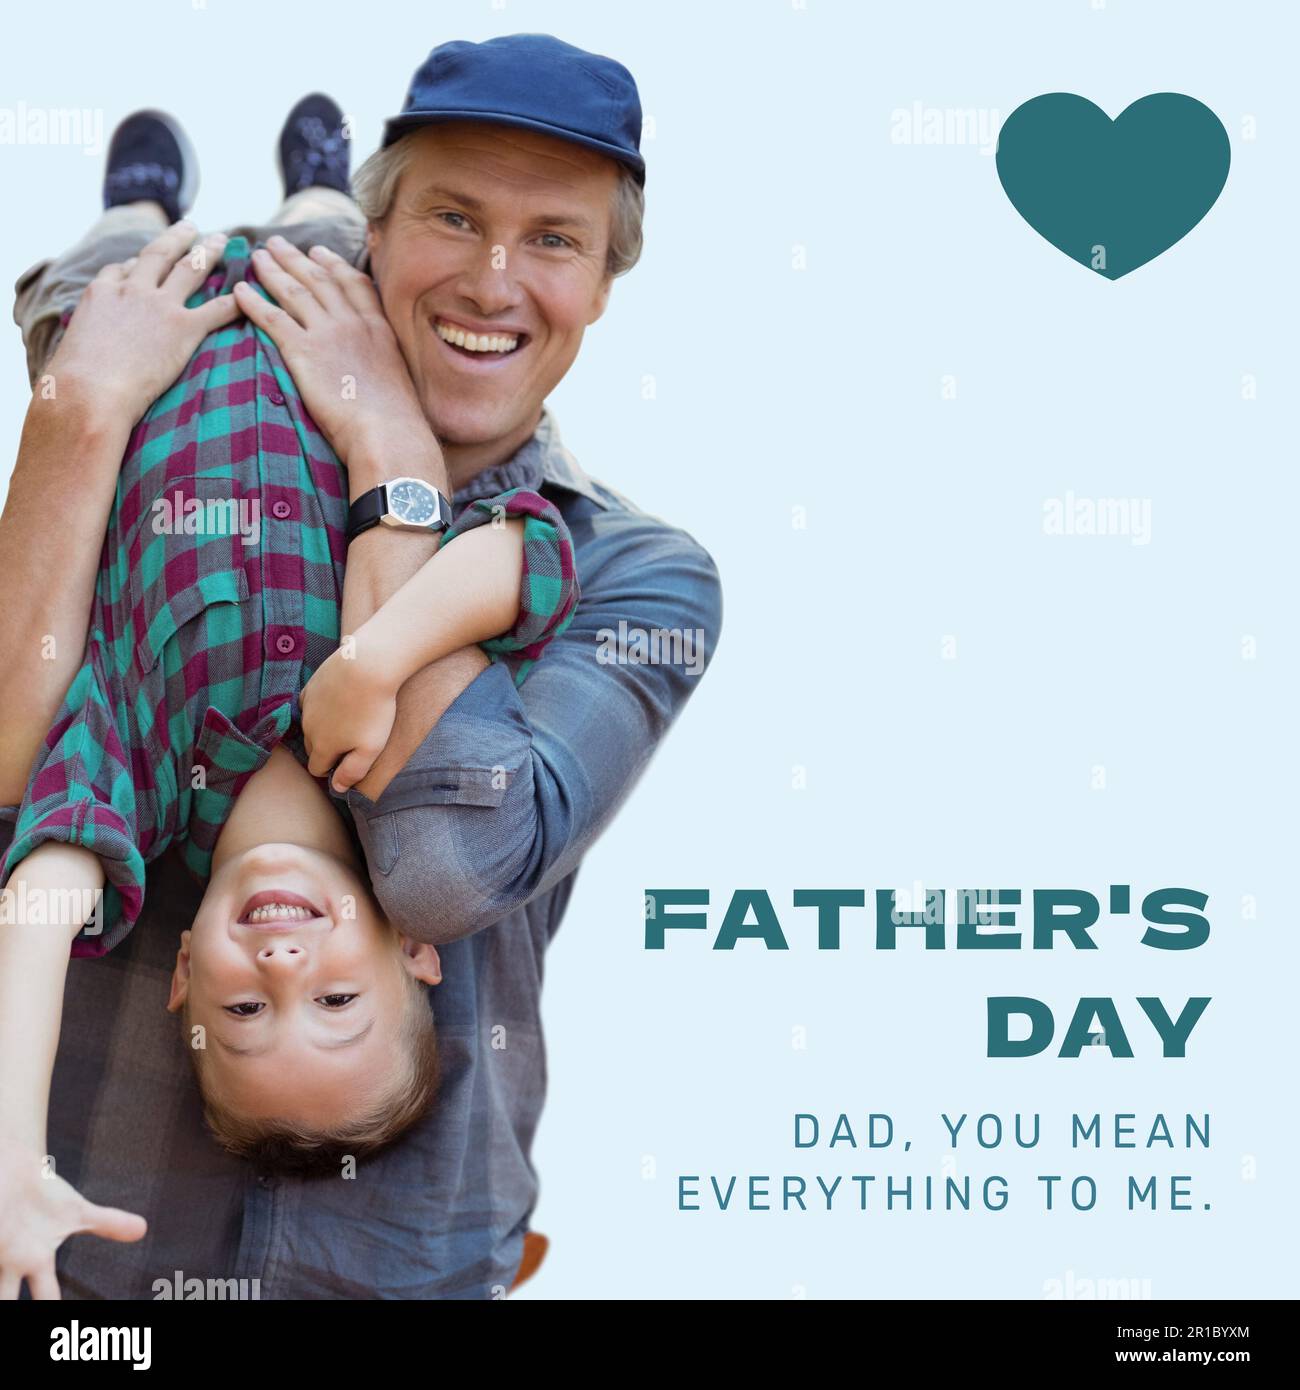 Composition of father's day text over caucasian father with son playing Stock Photo